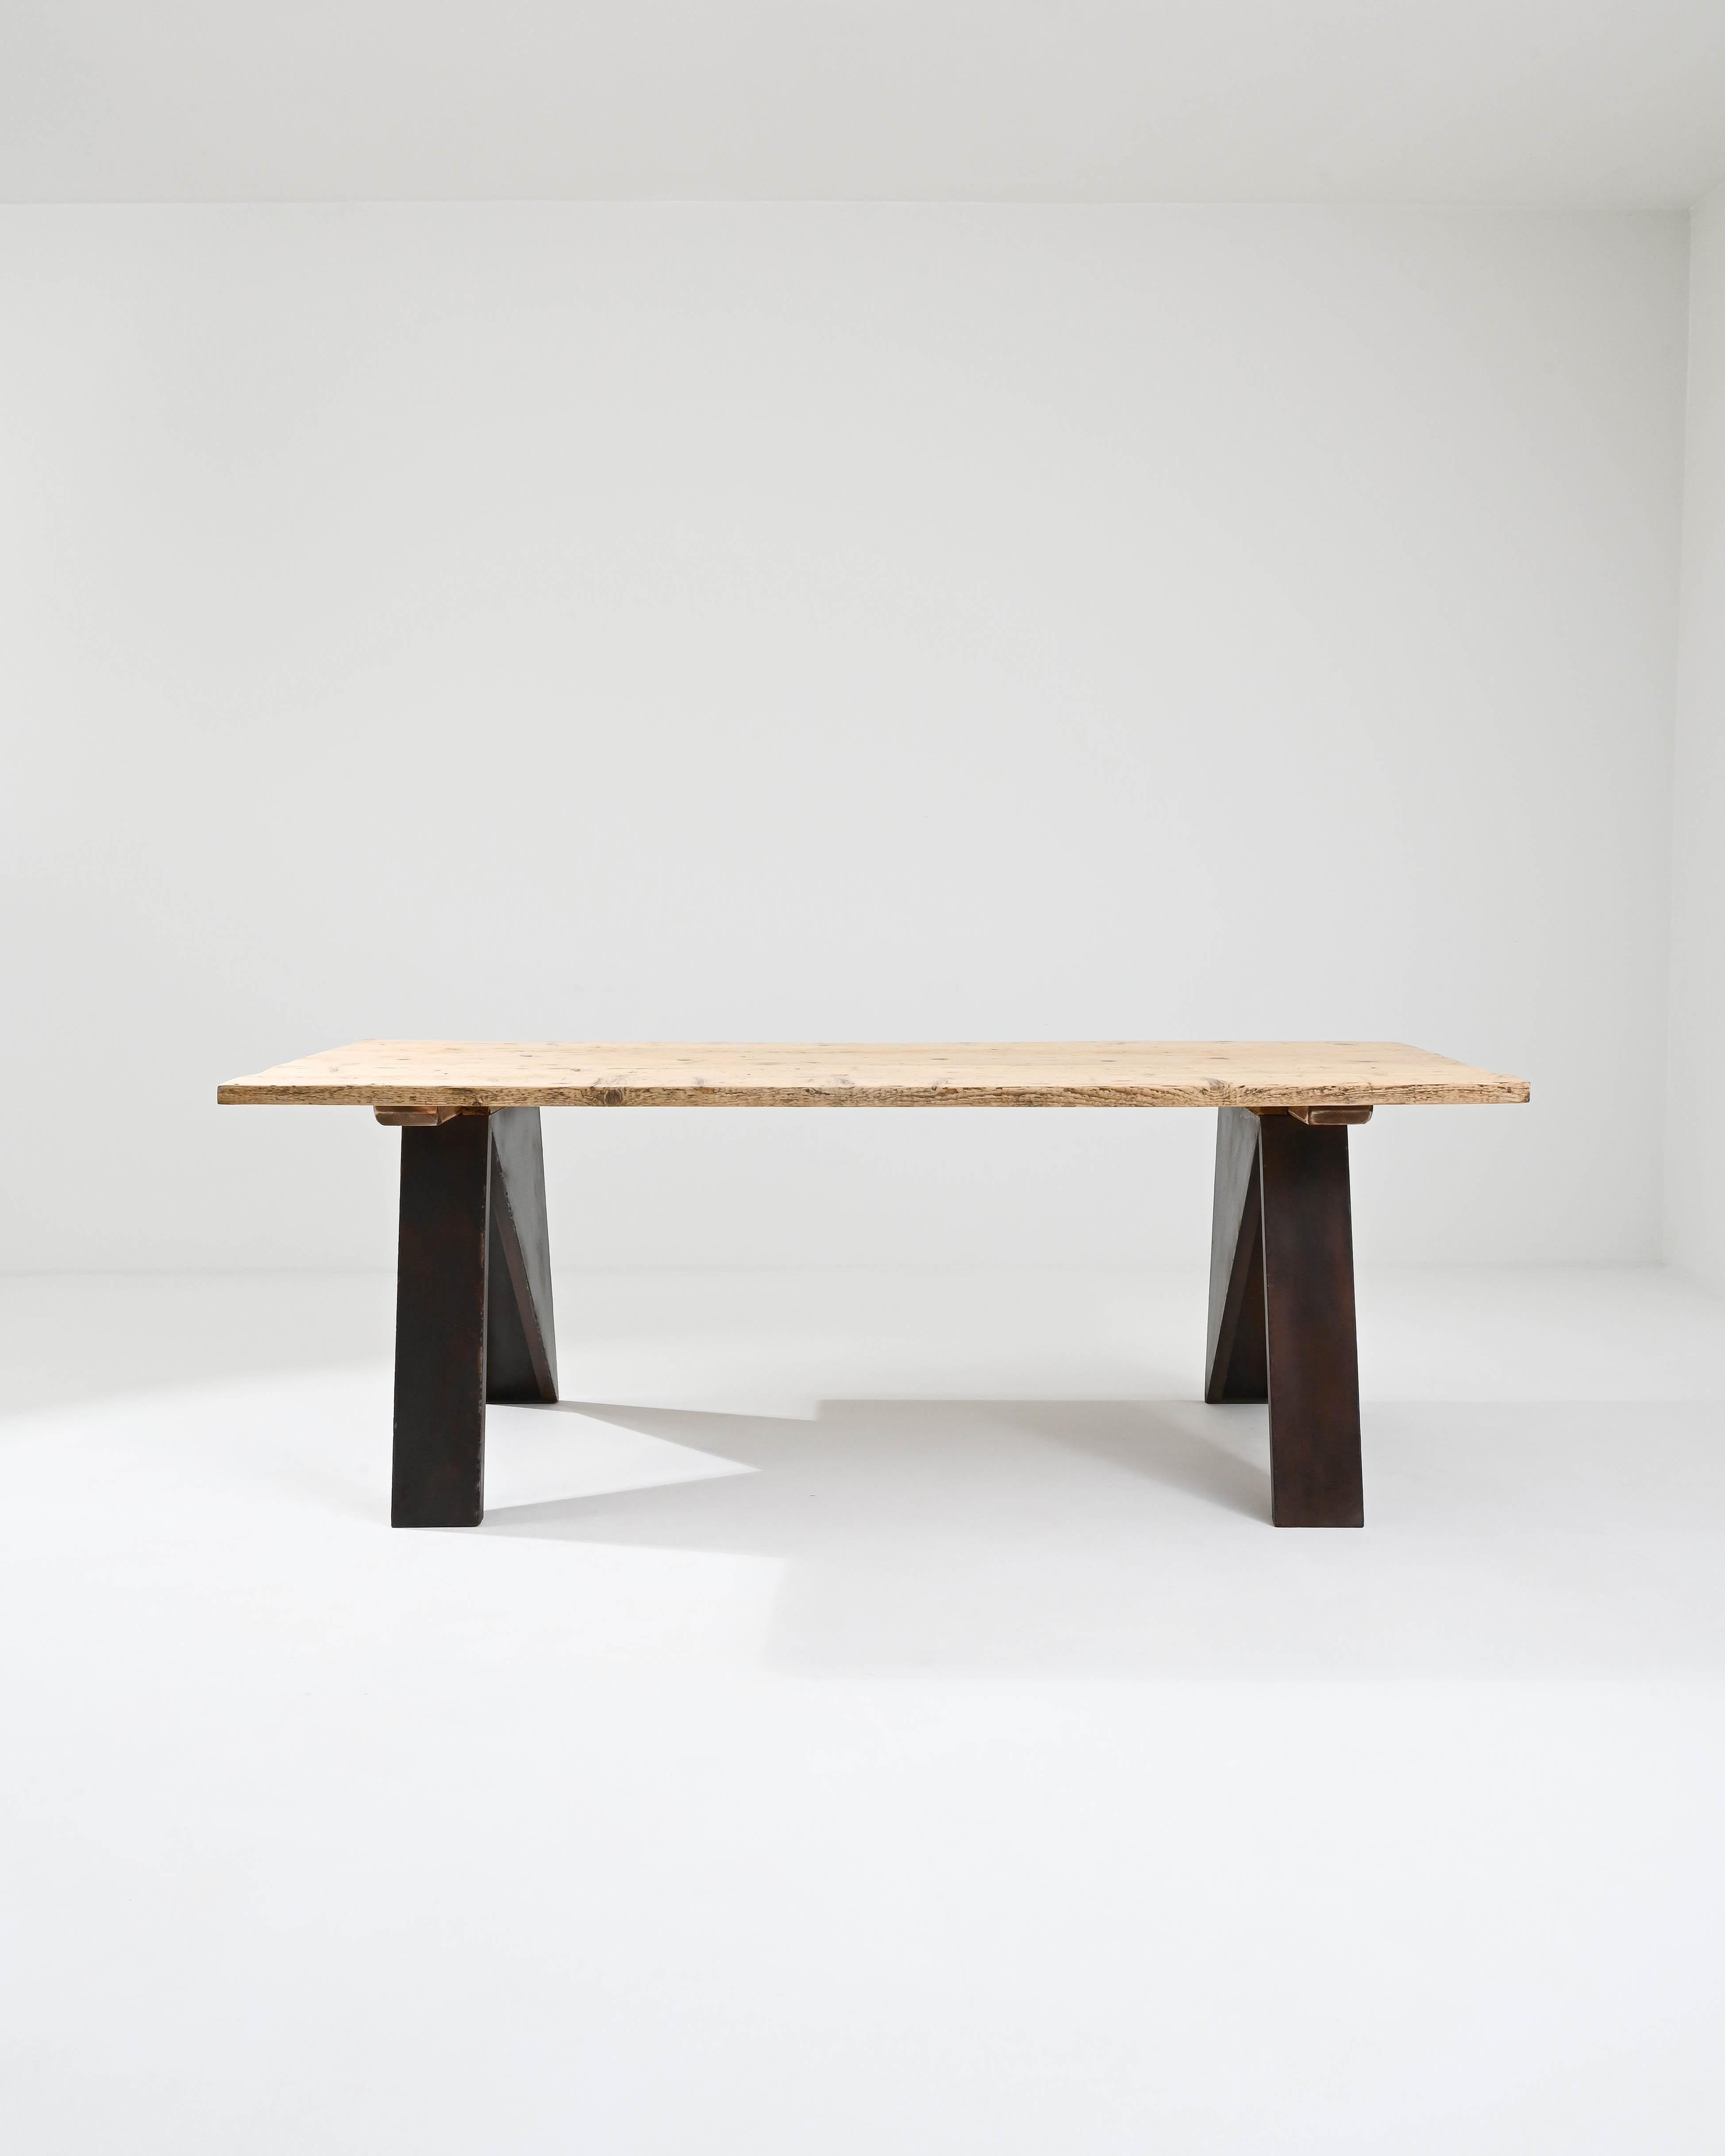 A metal dining table with a wooden top made in 20th century central Europe. This one of a kind prototype is composed with a vintage top supported by a metal base constructed in our atelier. Thick plates of steel have been welded together in a